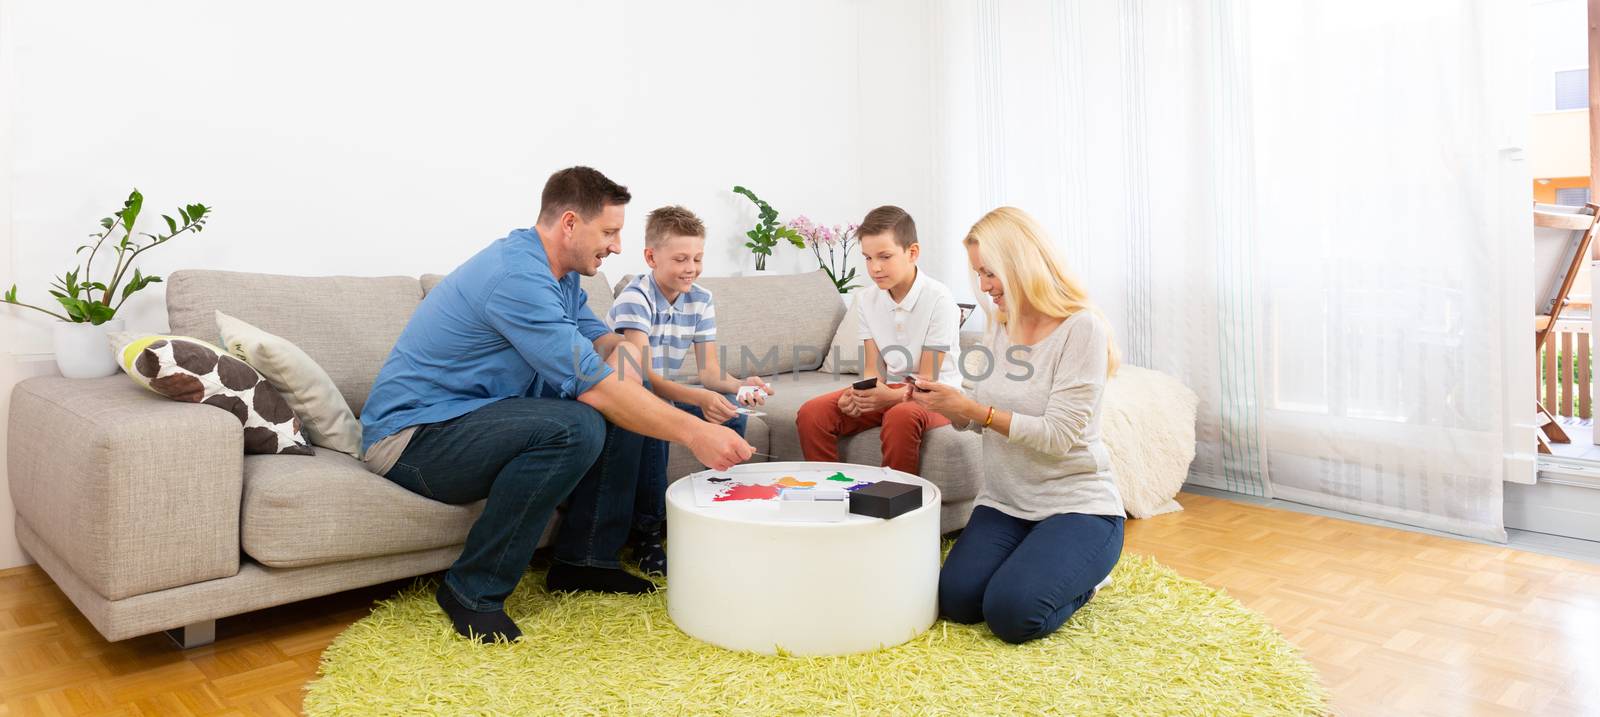 Happy young family playing card game on living room sofa at home. Spending quality leisure time with children and family concept. Cards are generic and debranded.